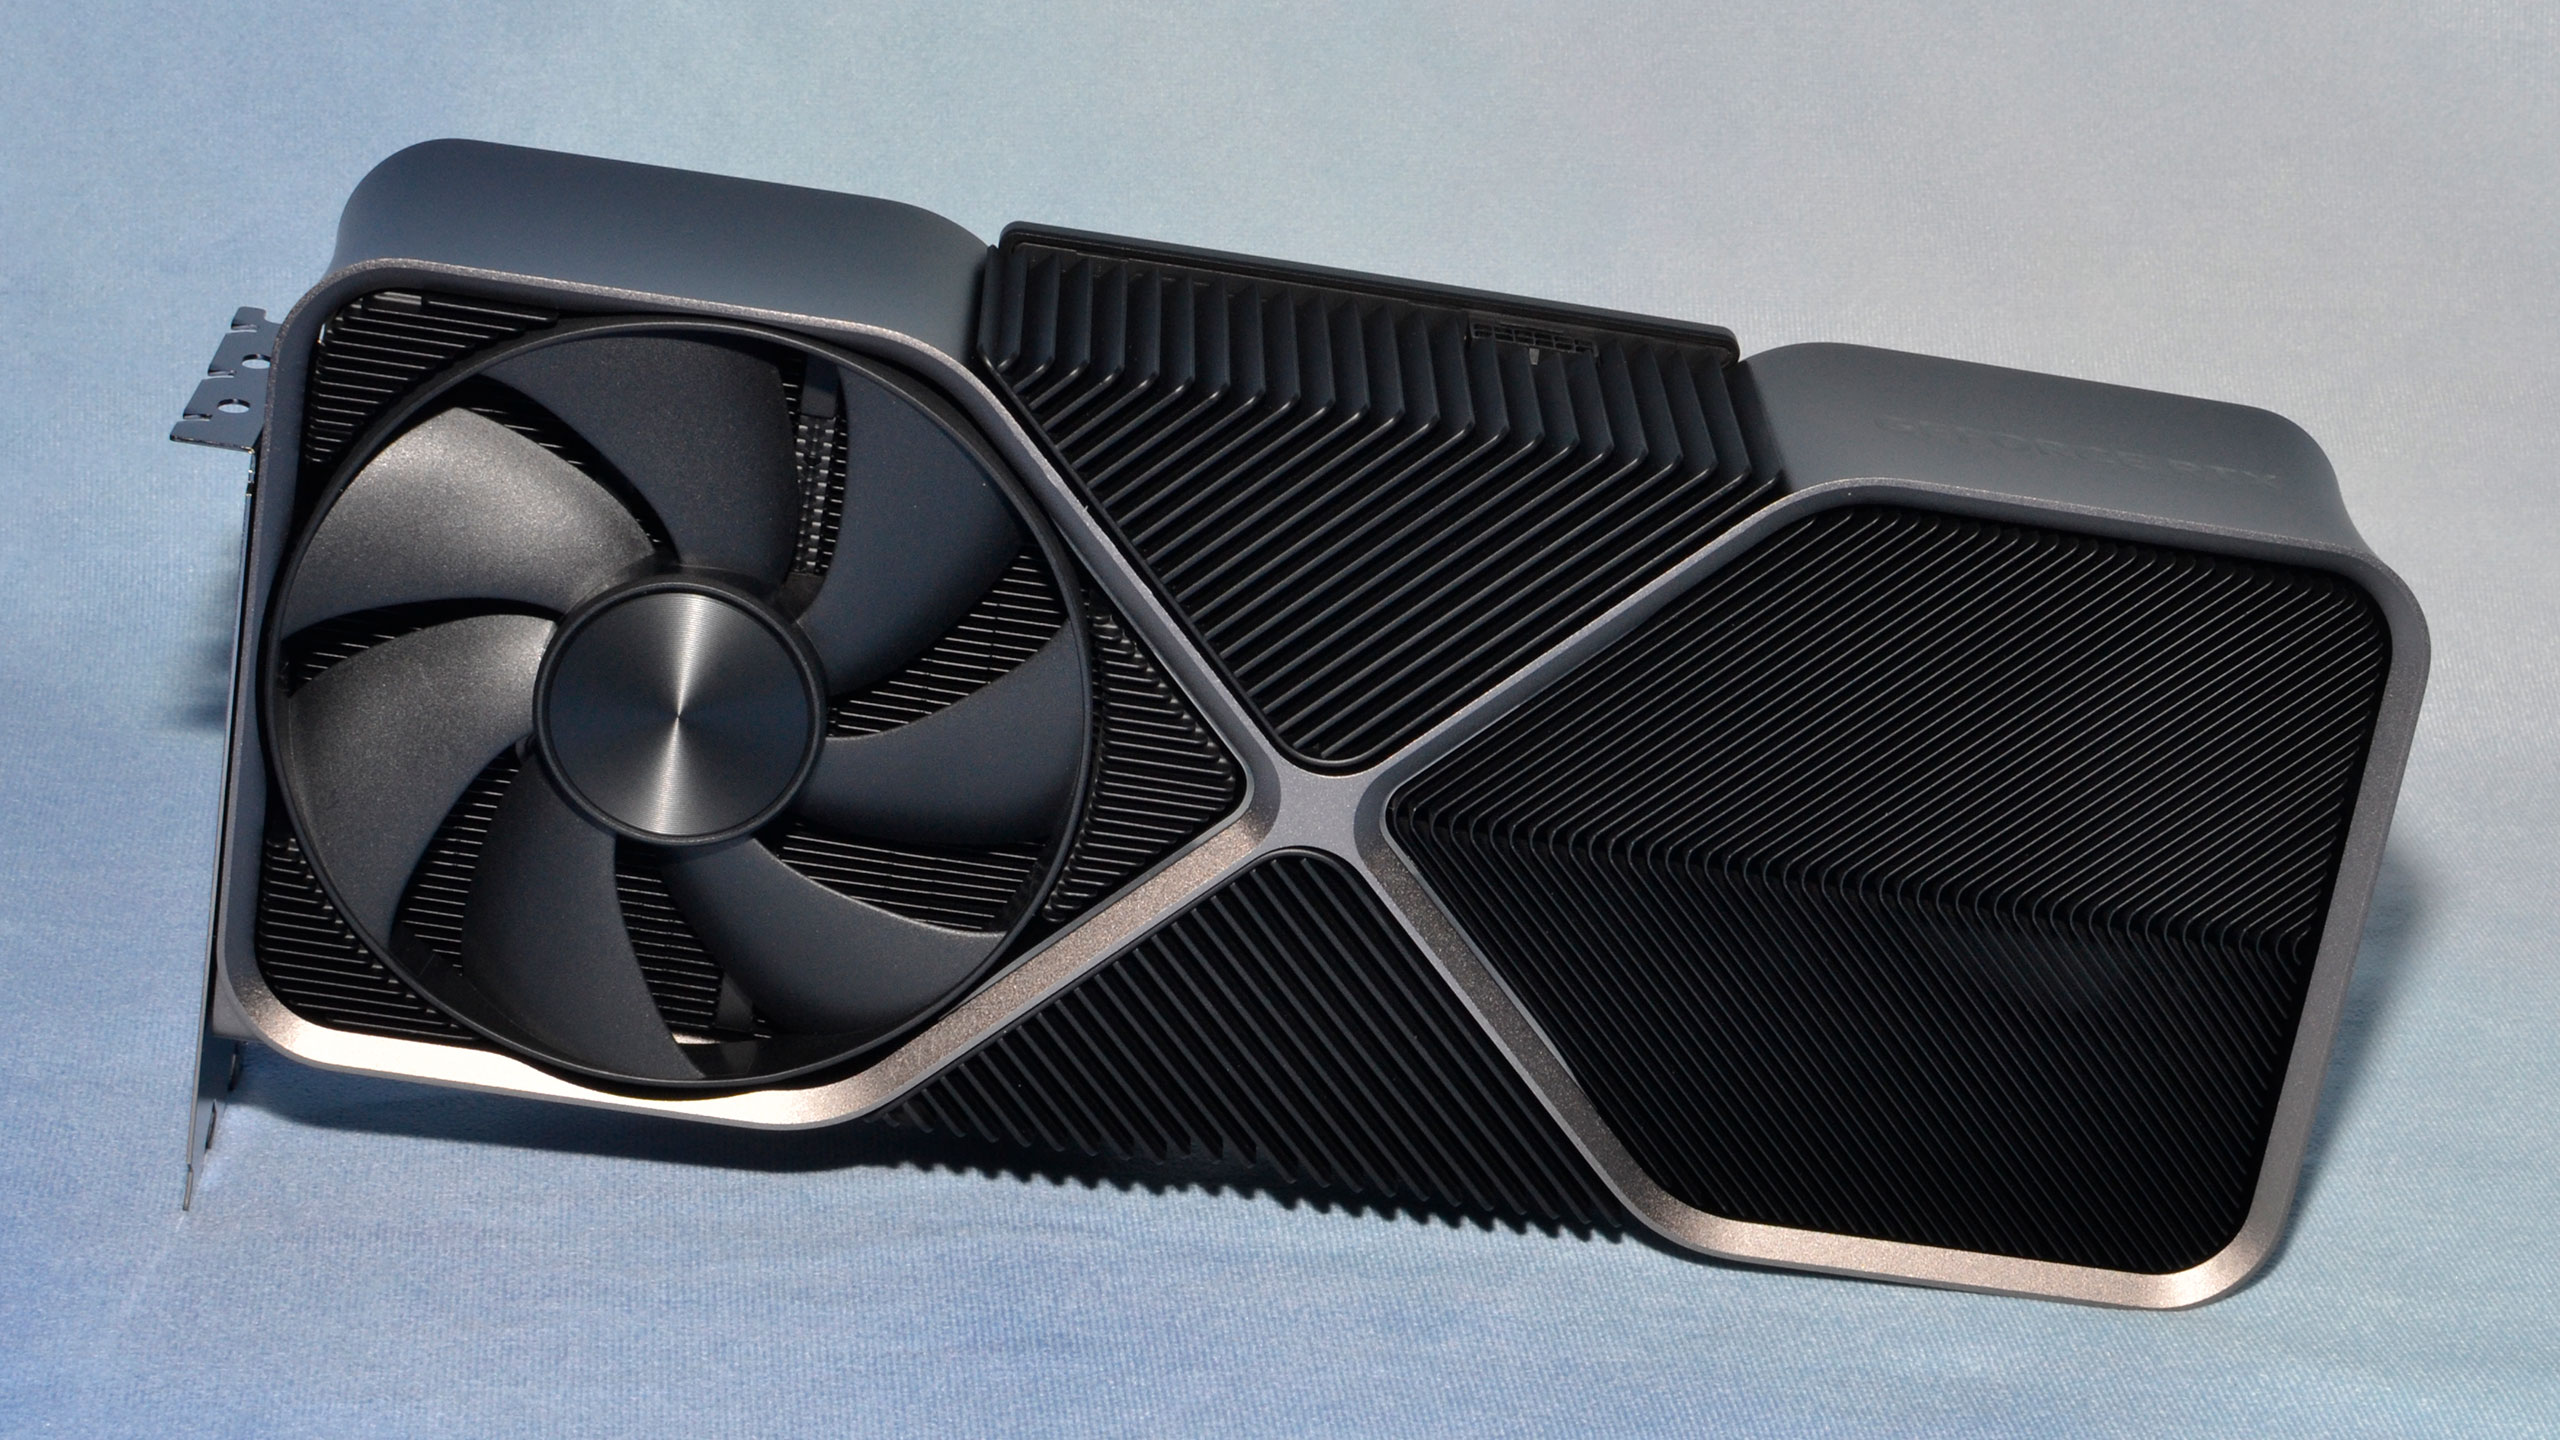 ROG Strix GeForce RTX 4080 review: More efficiency for less power 